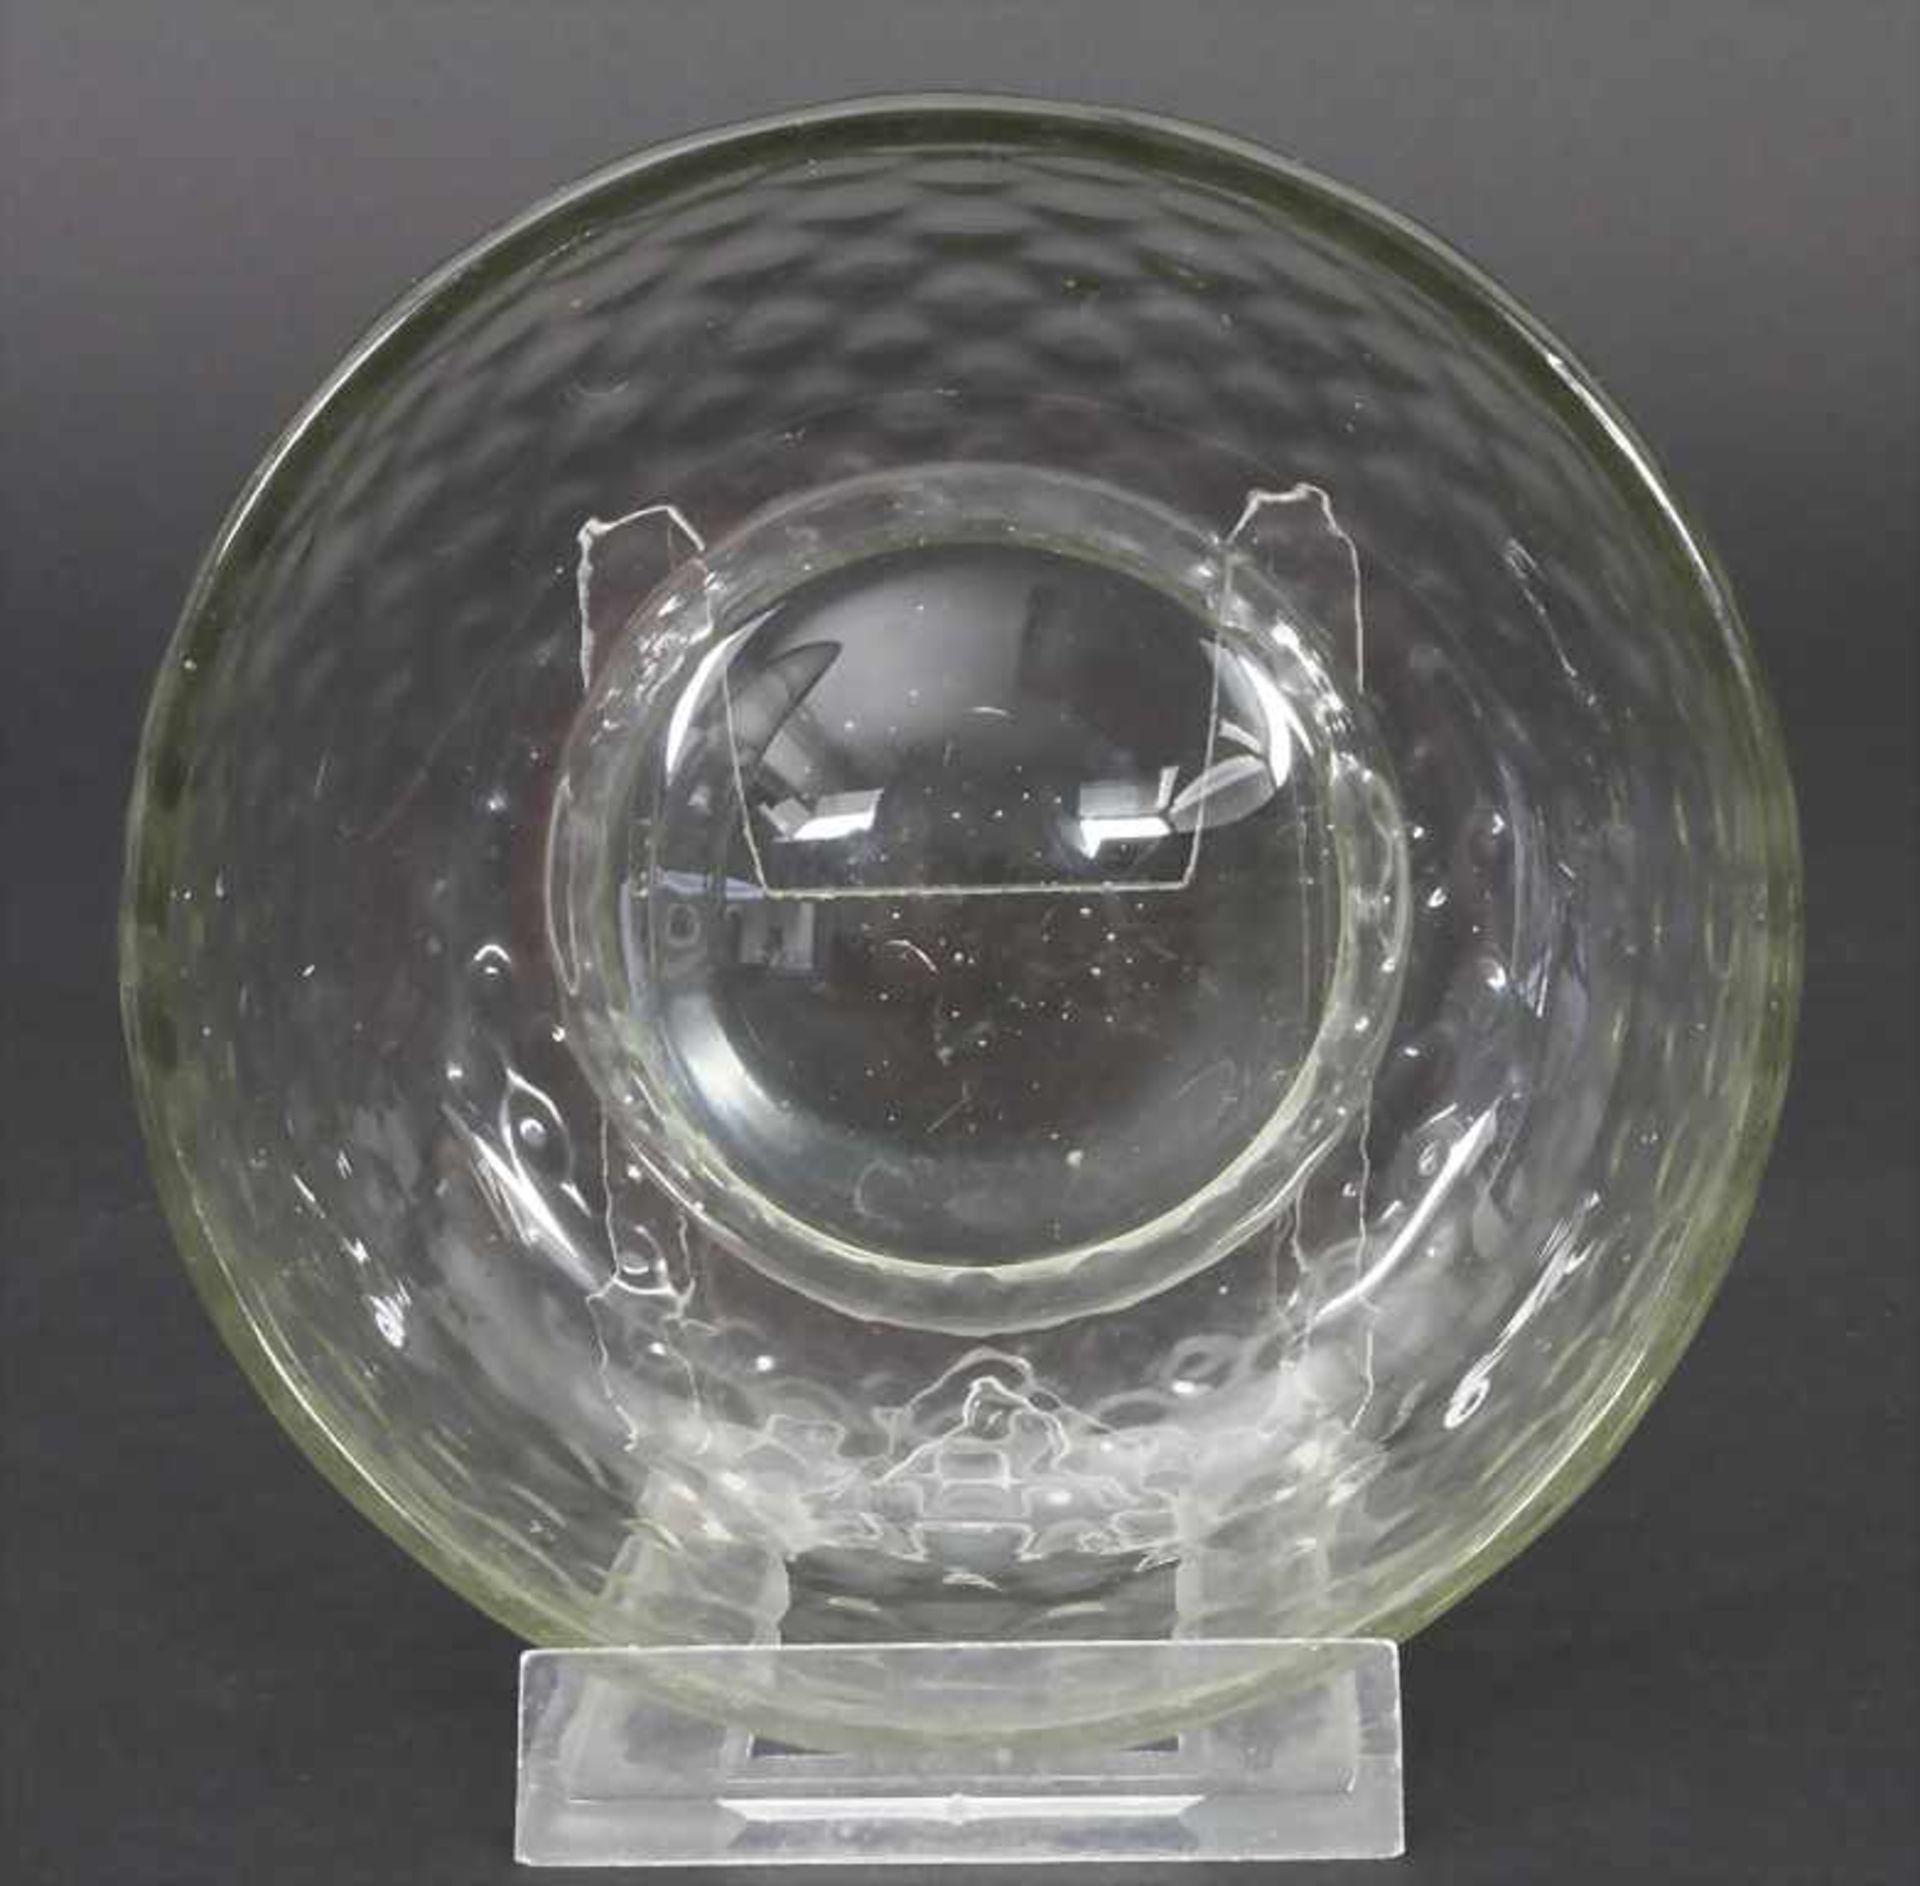 Glasschale / A glass bowl, England, 18. Jh. - Image 2 of 3